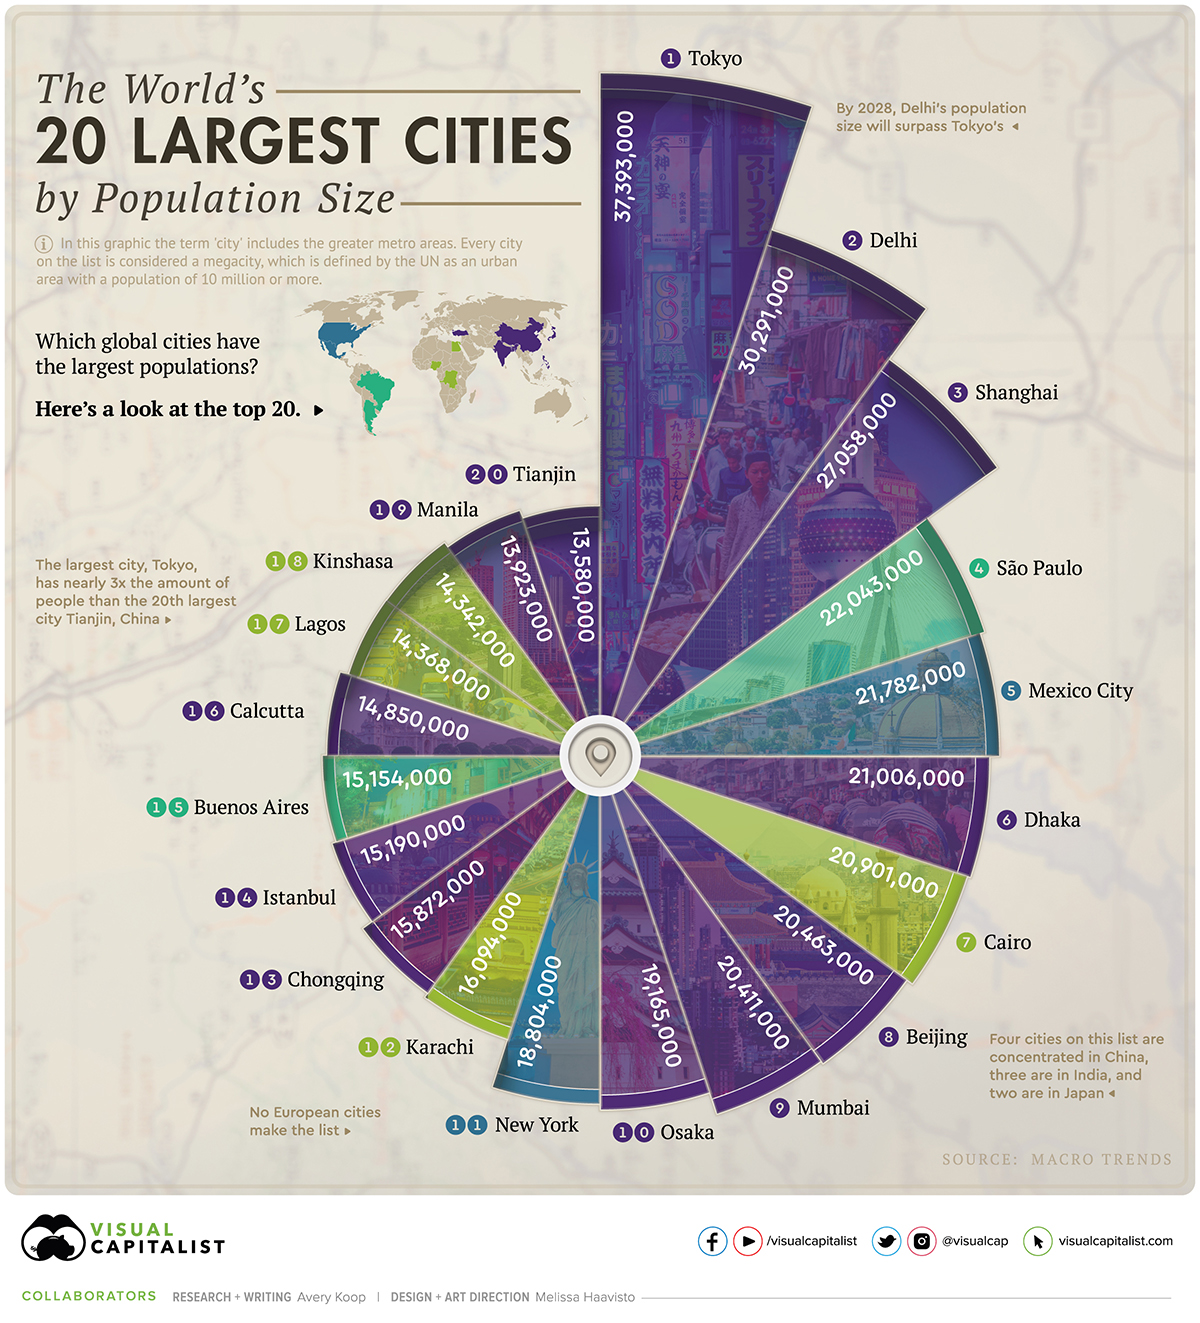 The world's 20 largest cities